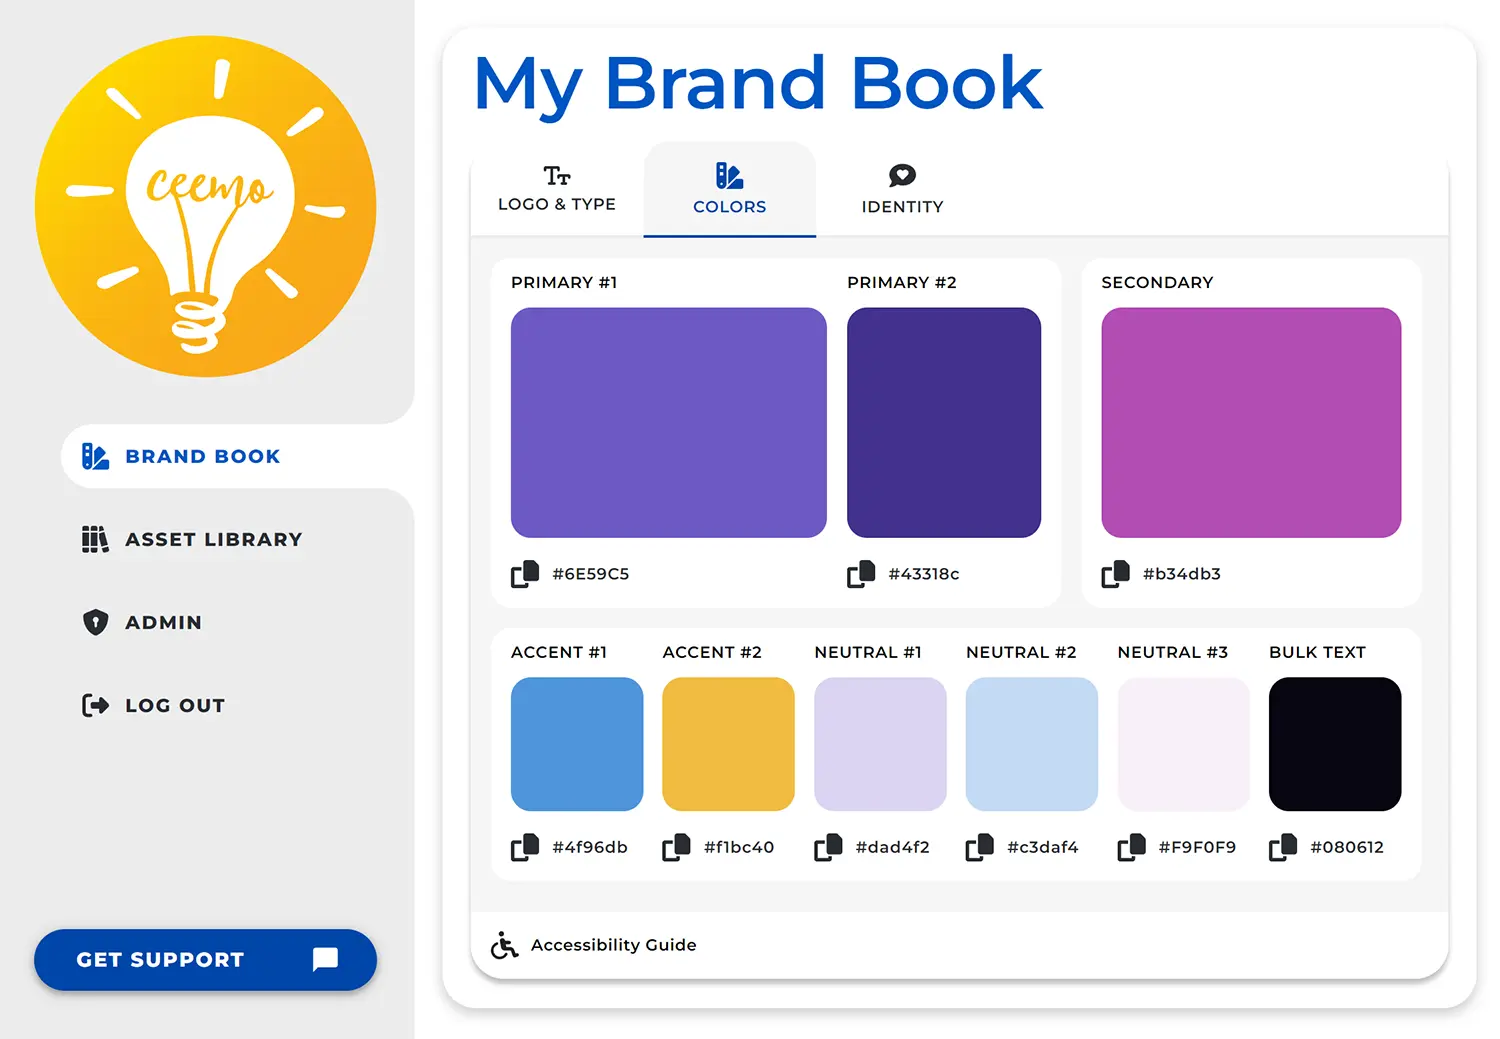 A screenshot of a sample Ceemo Brand Book, showing a Ceemo color scheme. The color scheme is organized as a series of blocks, showcasing your Primary 1, Primary 2, and Secondary colors on the top row. On the second row are the Accent 1, Accent 2, Neutral 1, Neutral 2, Neutral 3, and Bulk Text colors. Beneath each color block is the color hex code for that color. This sample image is used to illustrate the types of colors in a Ceemo color scheme, and make it easier to explain the rules behind each type of color in your scheme.